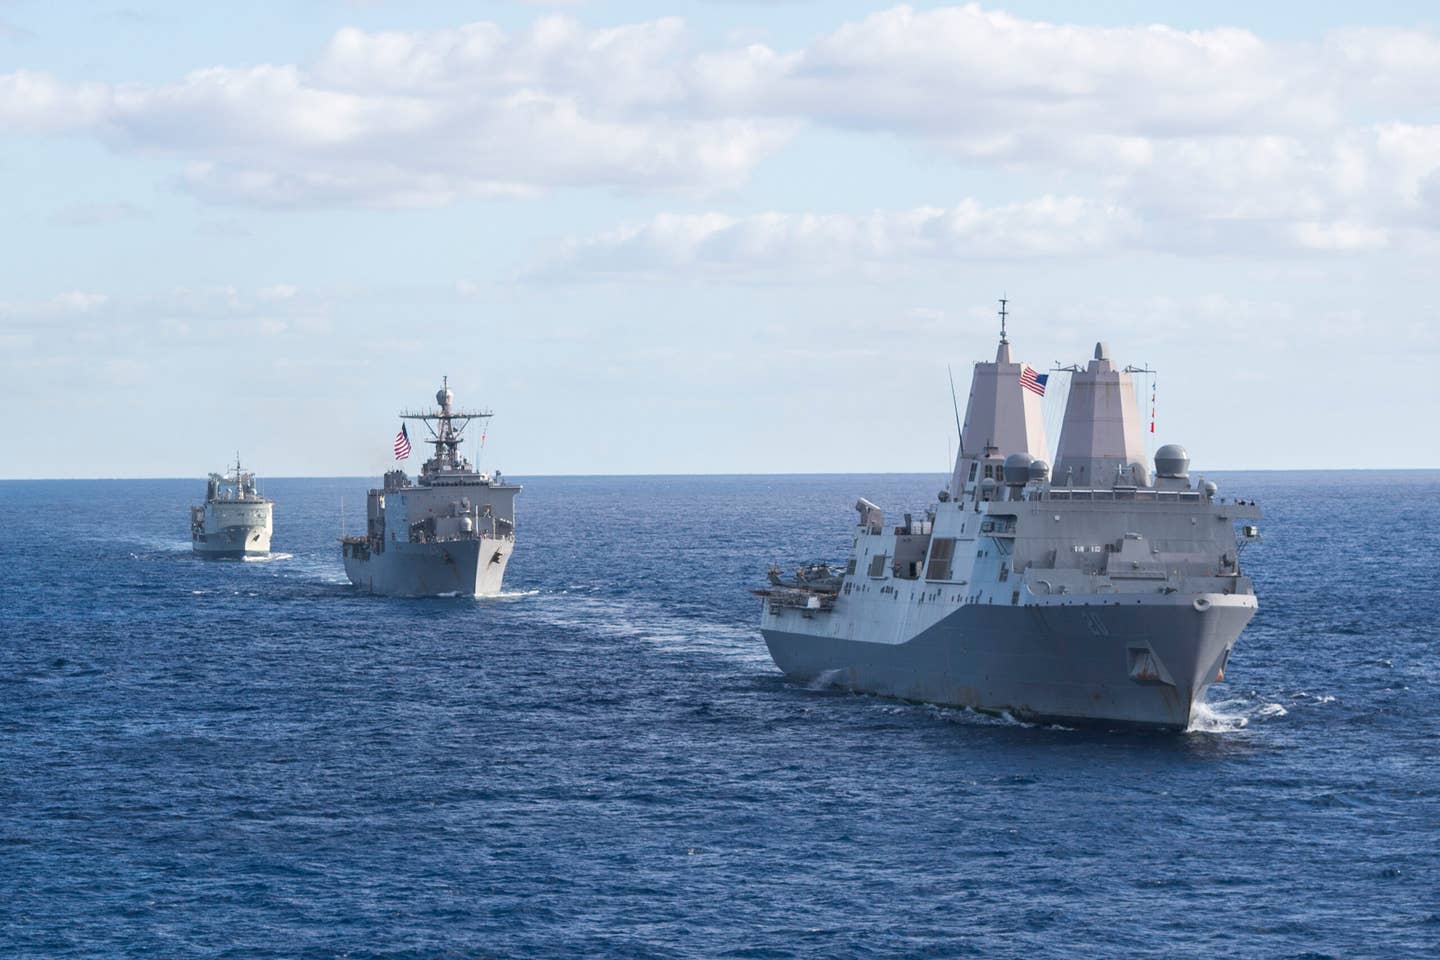 The amphibious transport dock USS <em>Green Bay</em> (LPD-20), the dock landing ship USS <em>Ashland</em> (LSD-48), and a Royal Australian Navy replenishment oiler steam along with a Combined Amphibious Force during a multi-ship sailing formation during the Talisman Saber exercise in 2017. <em>U.S. Navy photo by Mass Communication Specialist 2nd Class Sarah Villegas/Released</em>